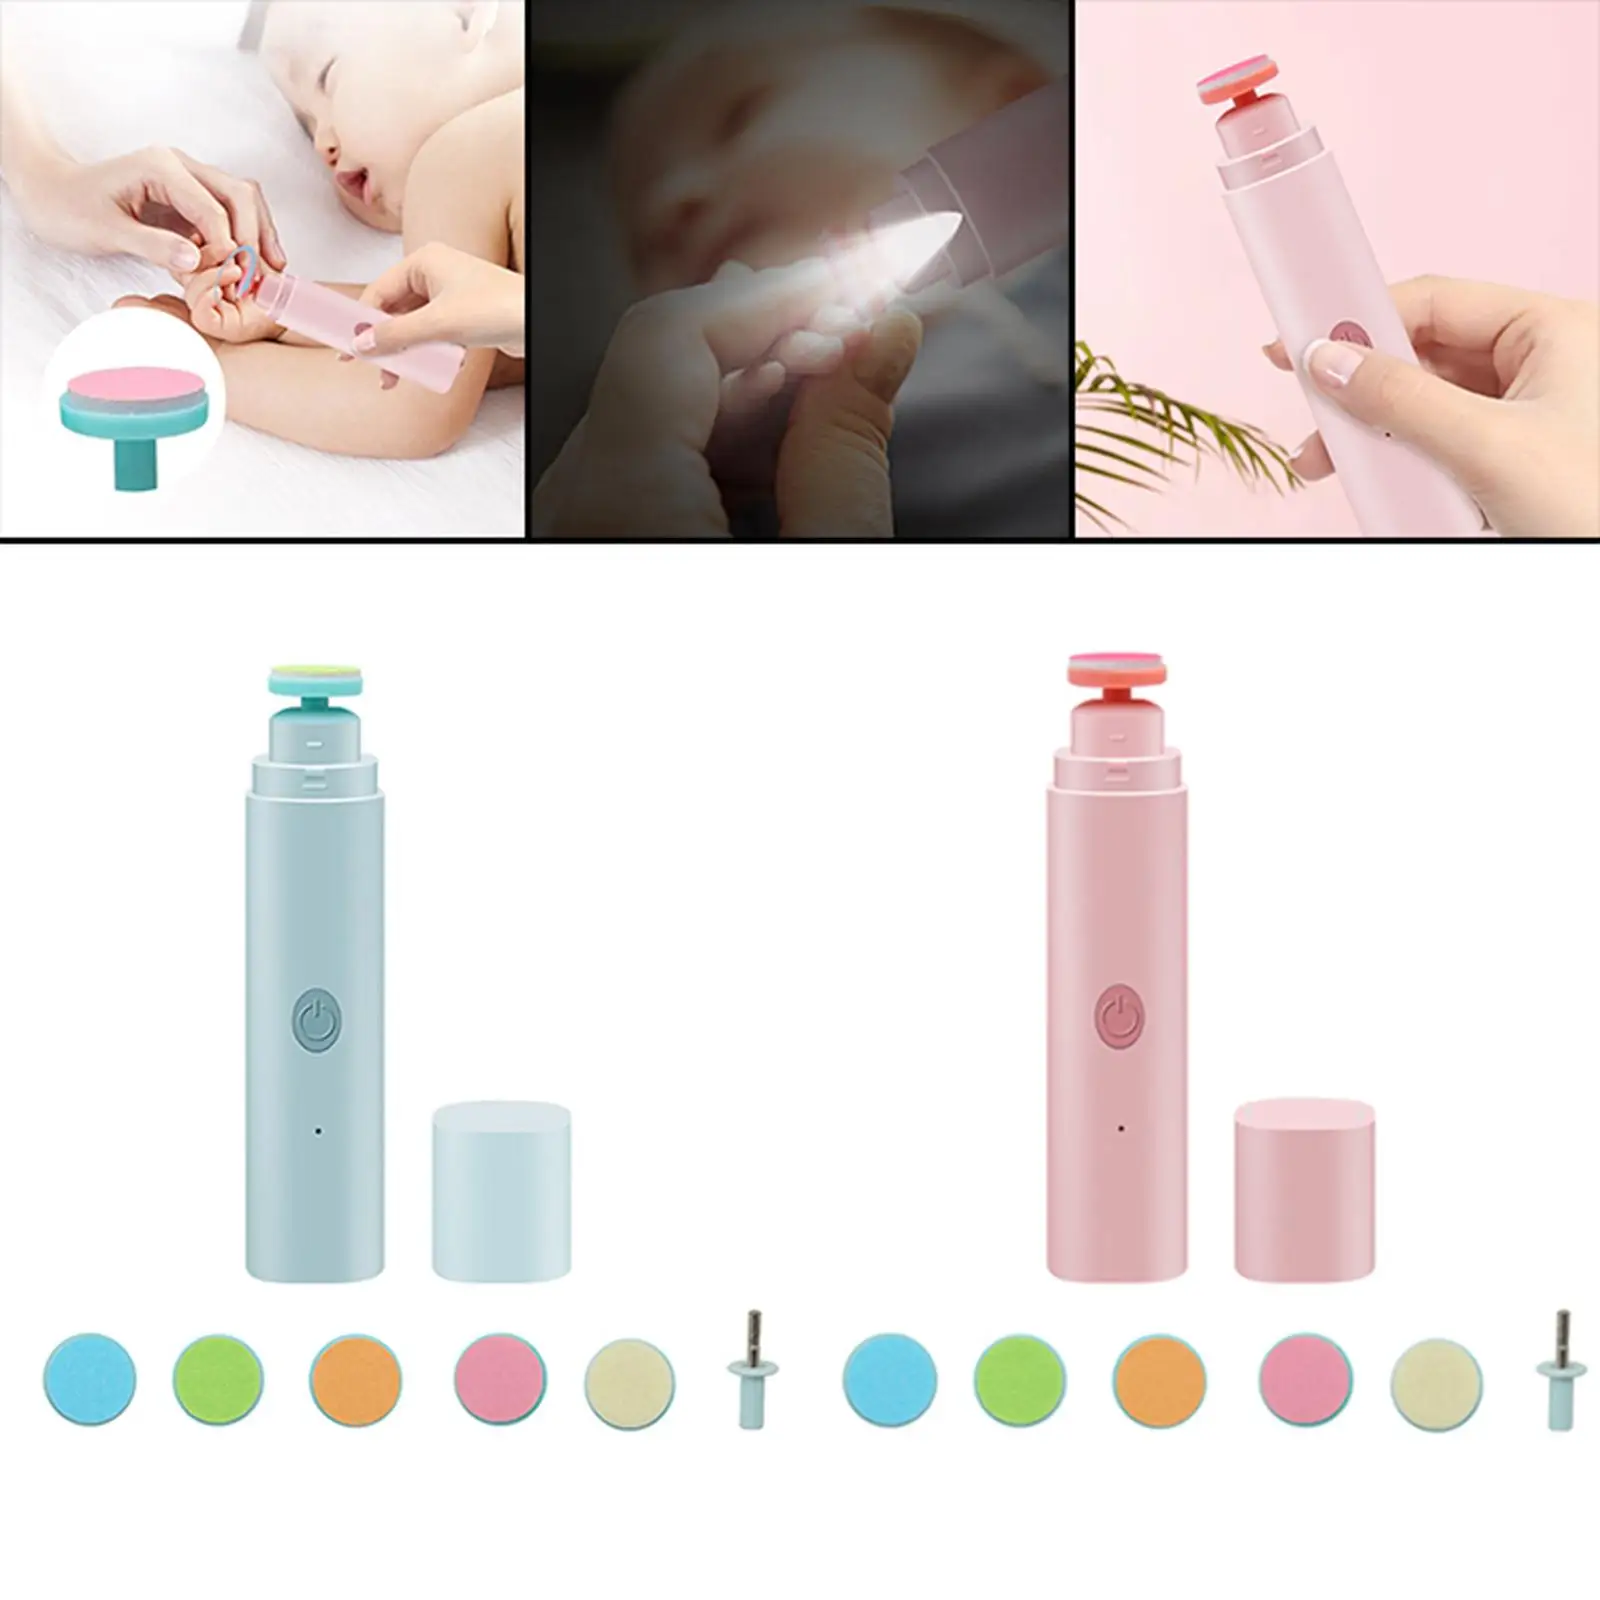 Electric Baby Nail File Drill Safety Polish LED Light 6 in 1 Manicure Care Cutter Clipper for Toes Fingernails Toddler Newborn